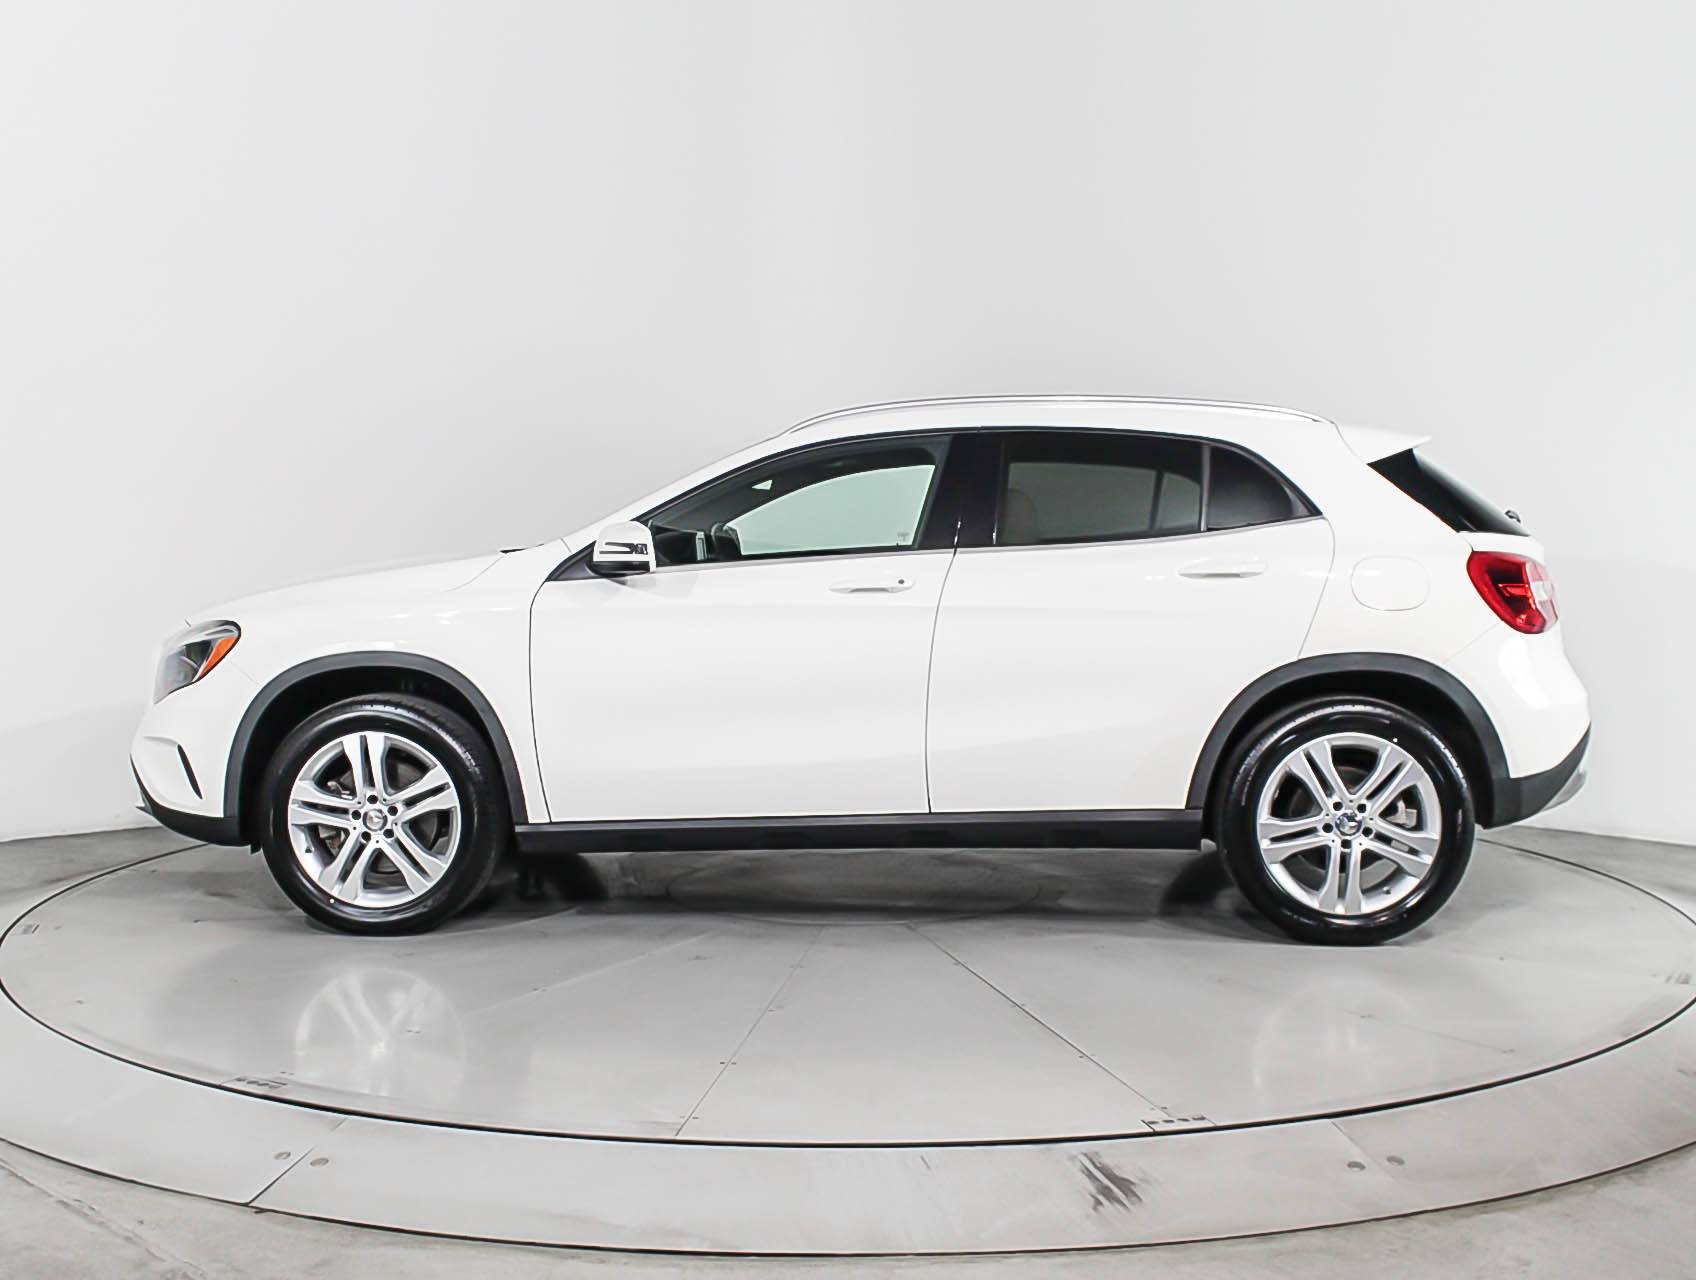 Used 2016 Mercedes Benz Gla Class Gla250 Suv For Sale In